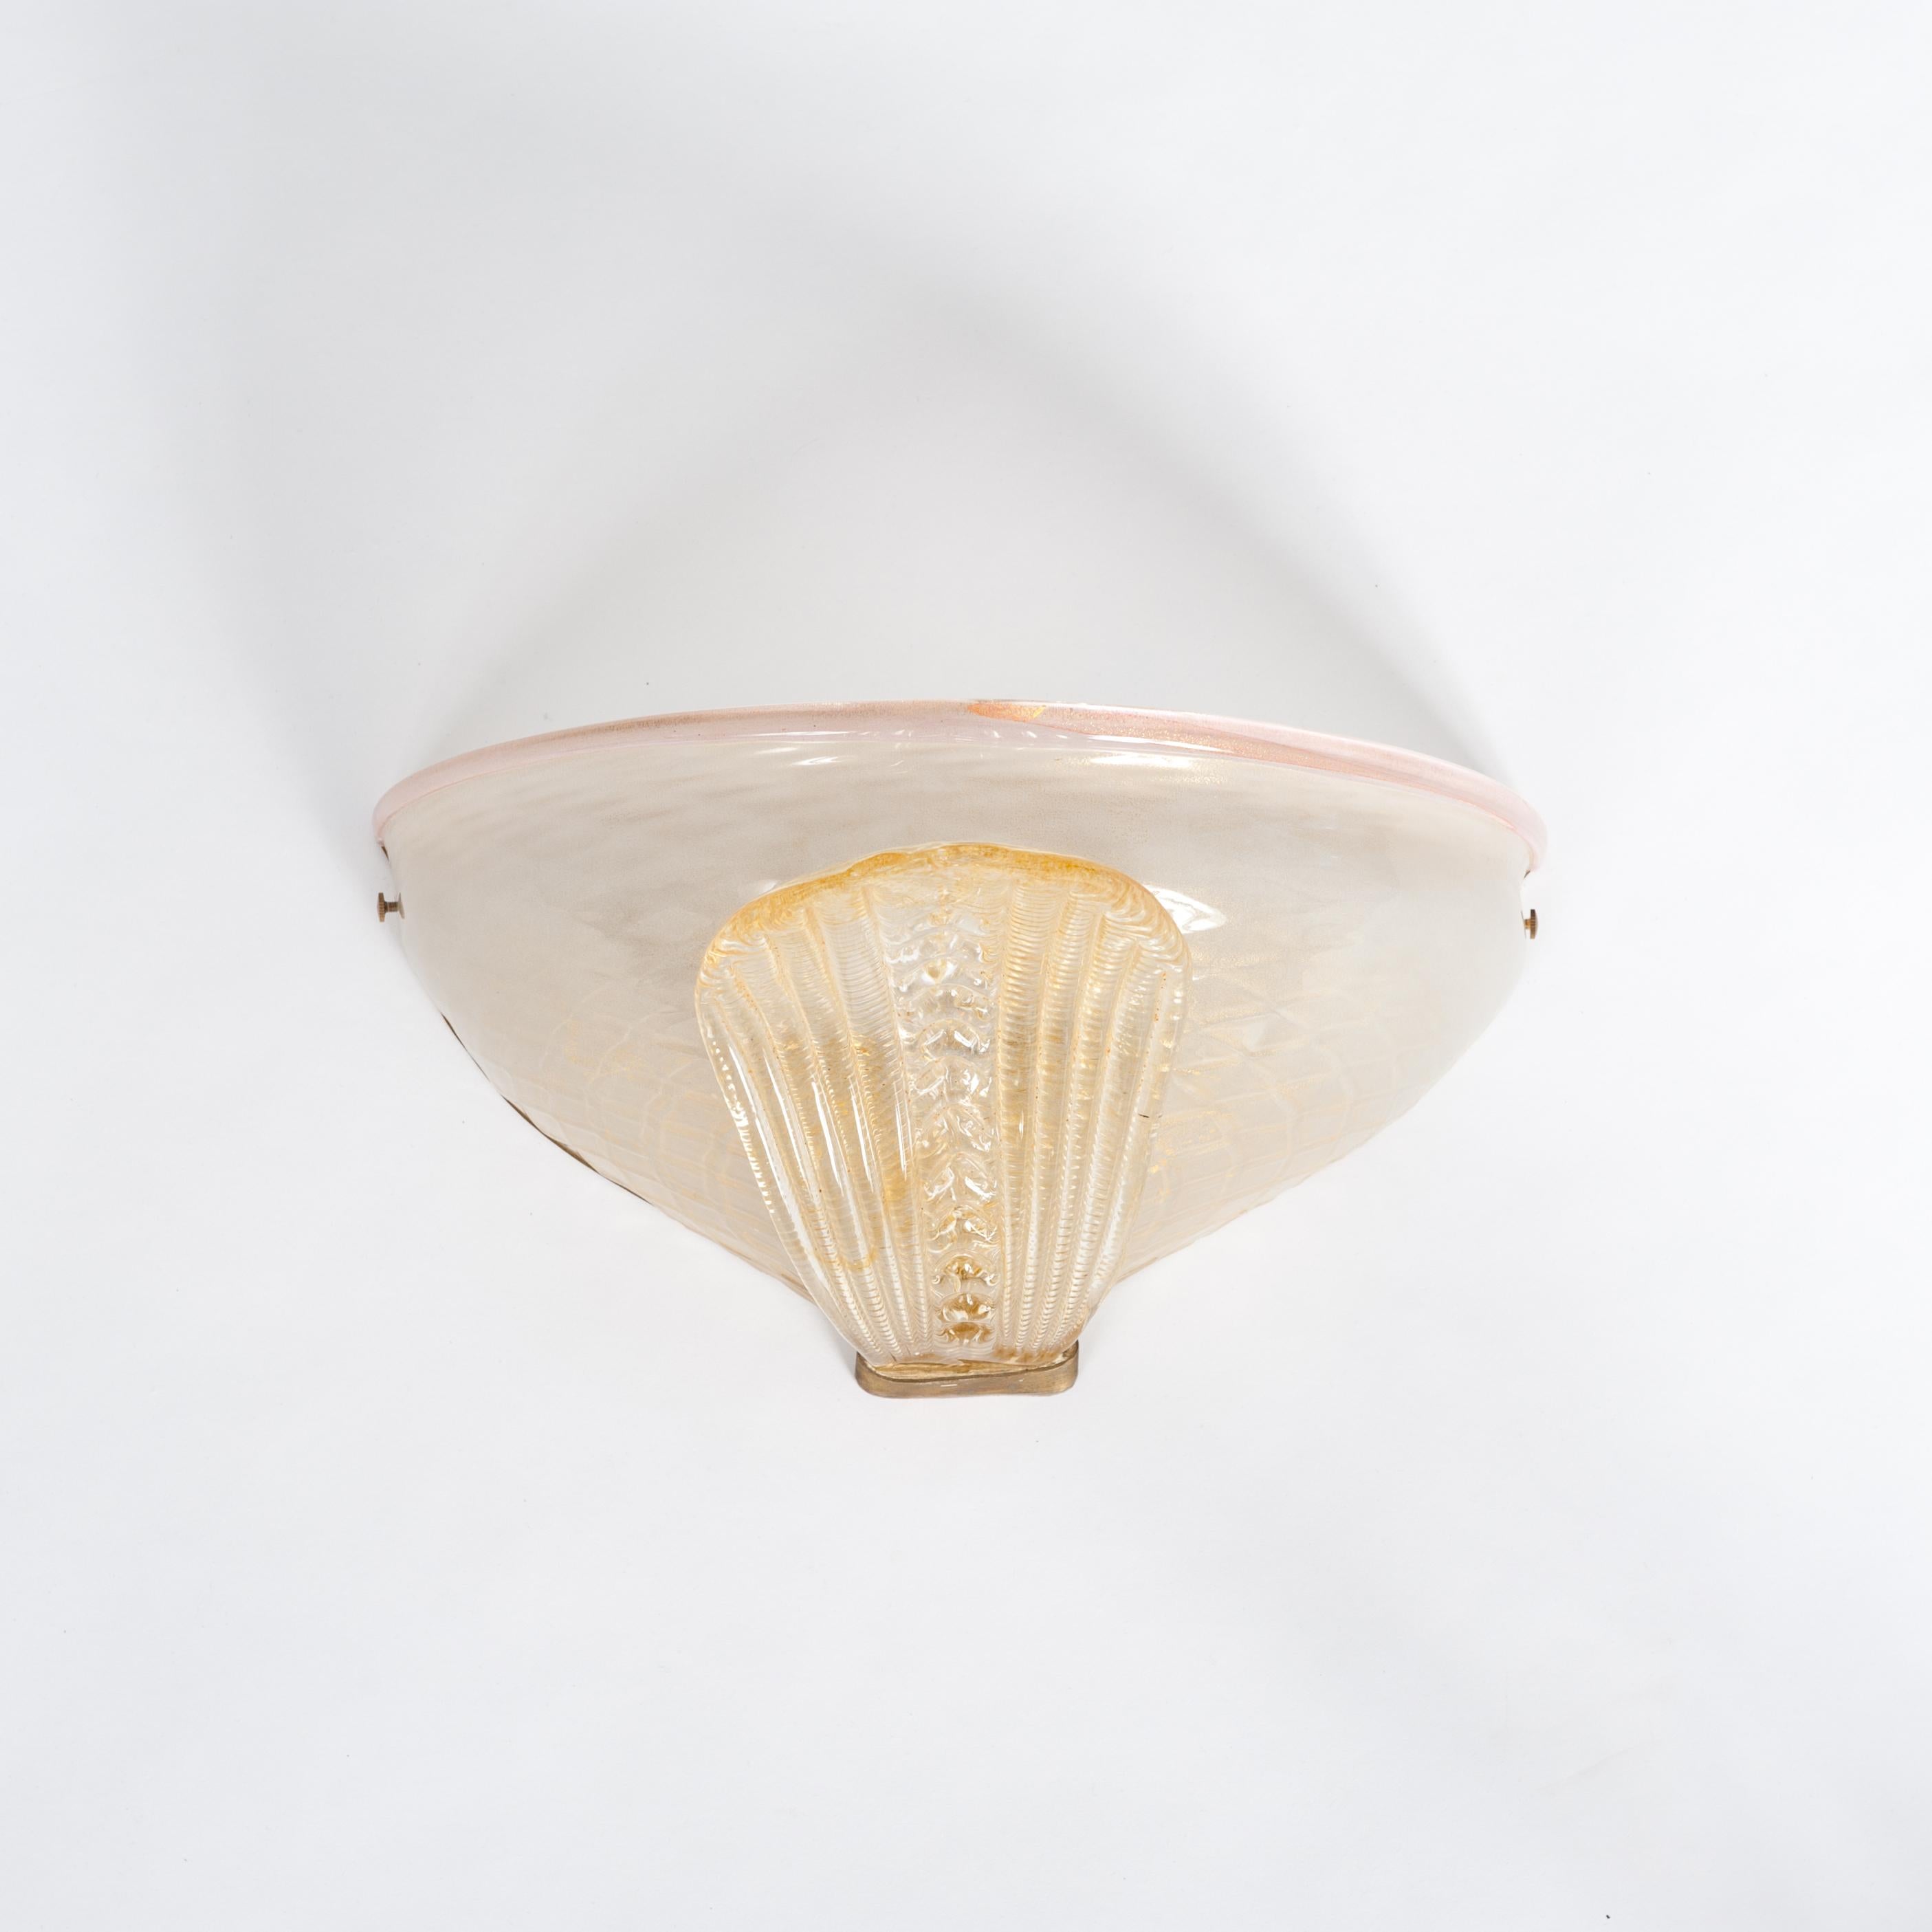 Pair of Murano glass wall lamps in transparent gold tone with rose-colored details. 
Half-shell shape with a stylized leaf as front decoration. 2-lit electrified.
Due to the leaf in the front, the objects also have a sculptural